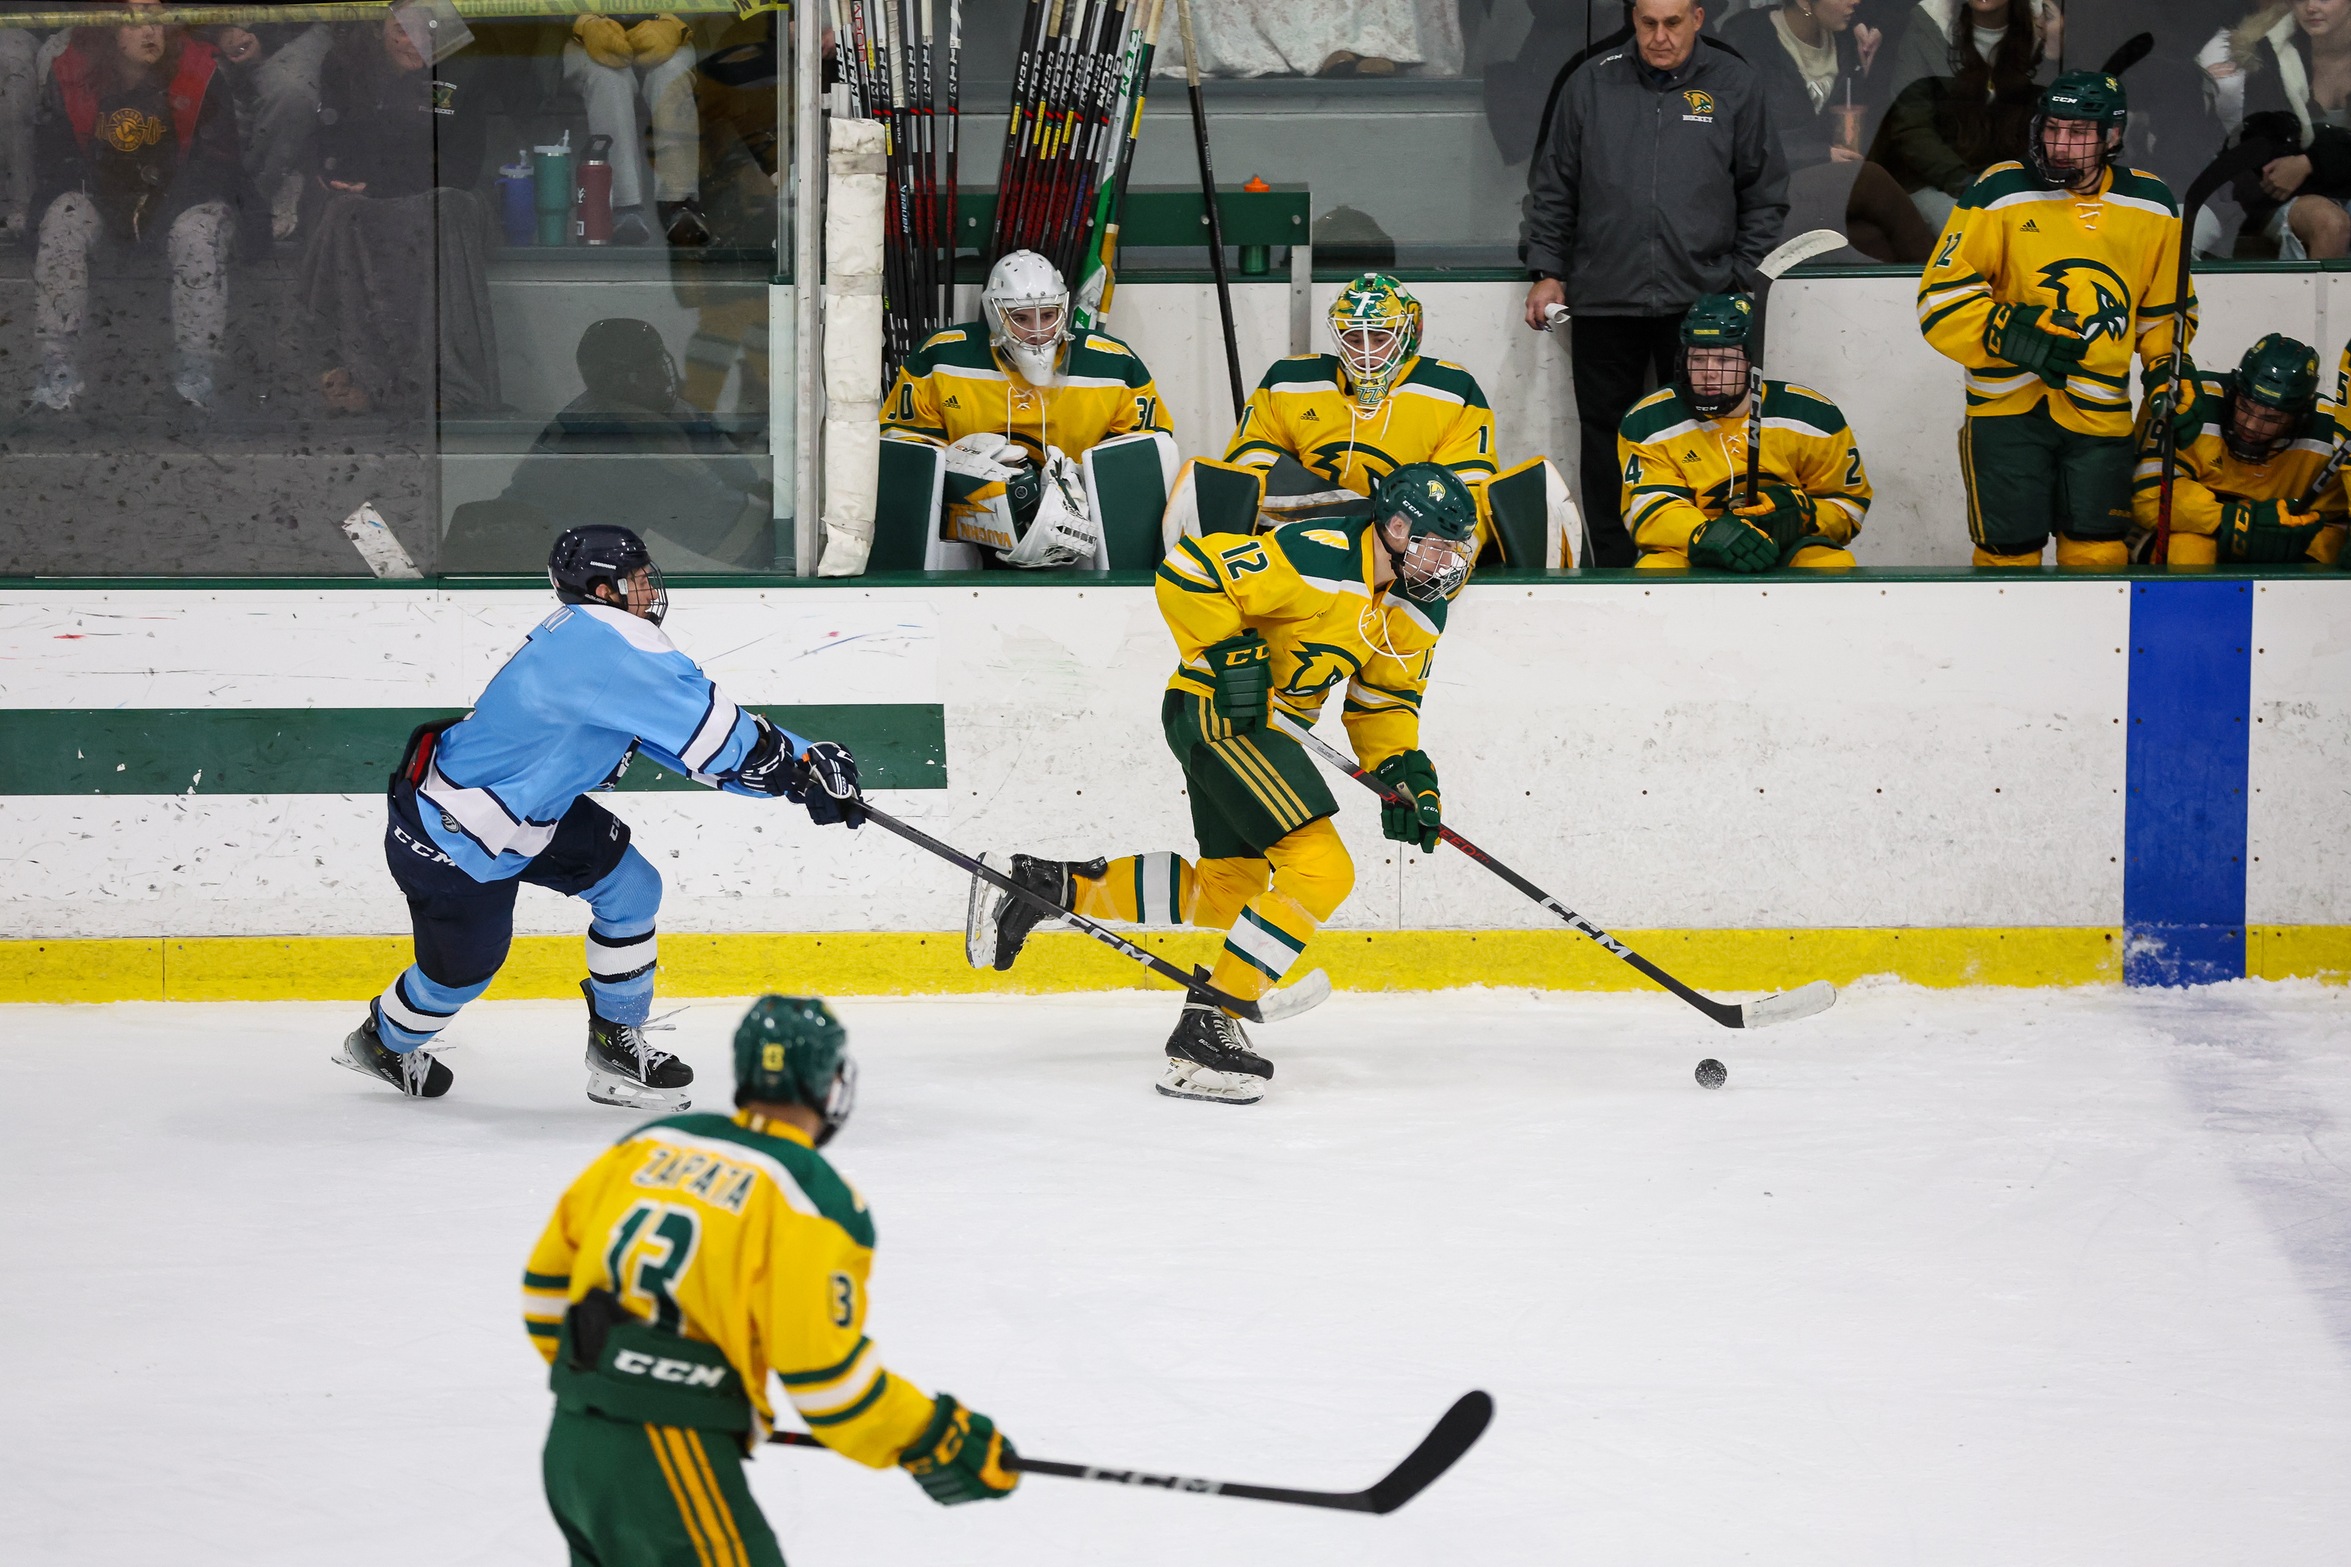 Ice Hockey Blanks Rams, 2-0 To Secure Second Seed In MASCAC Post-Season Tournament